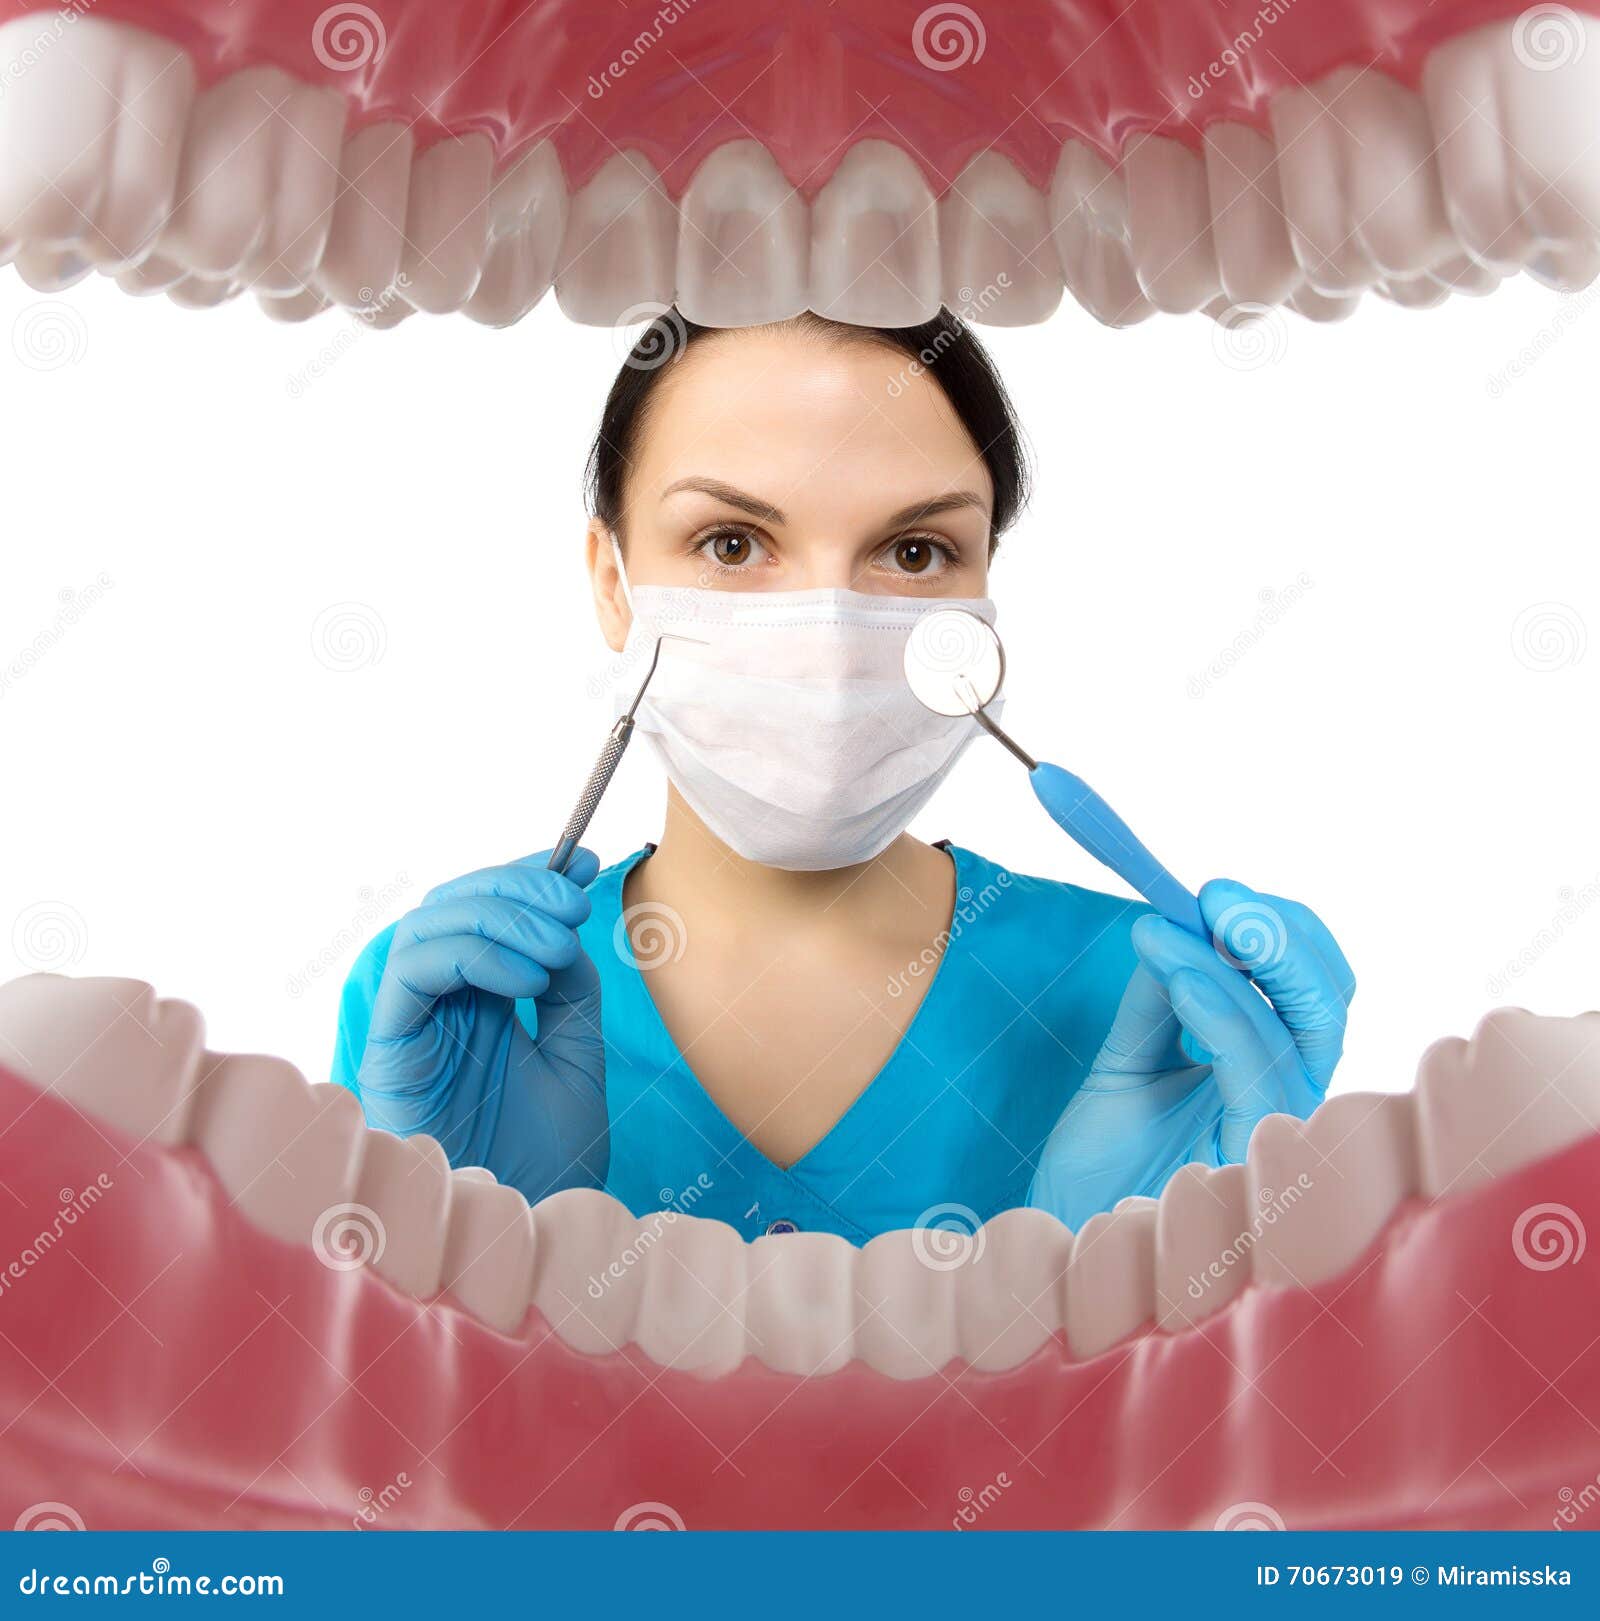 dentist with tools. concept of dentistry, whitening, oral hygiene, teeth cleaning with toothbrush, floss. dentistry, taking care